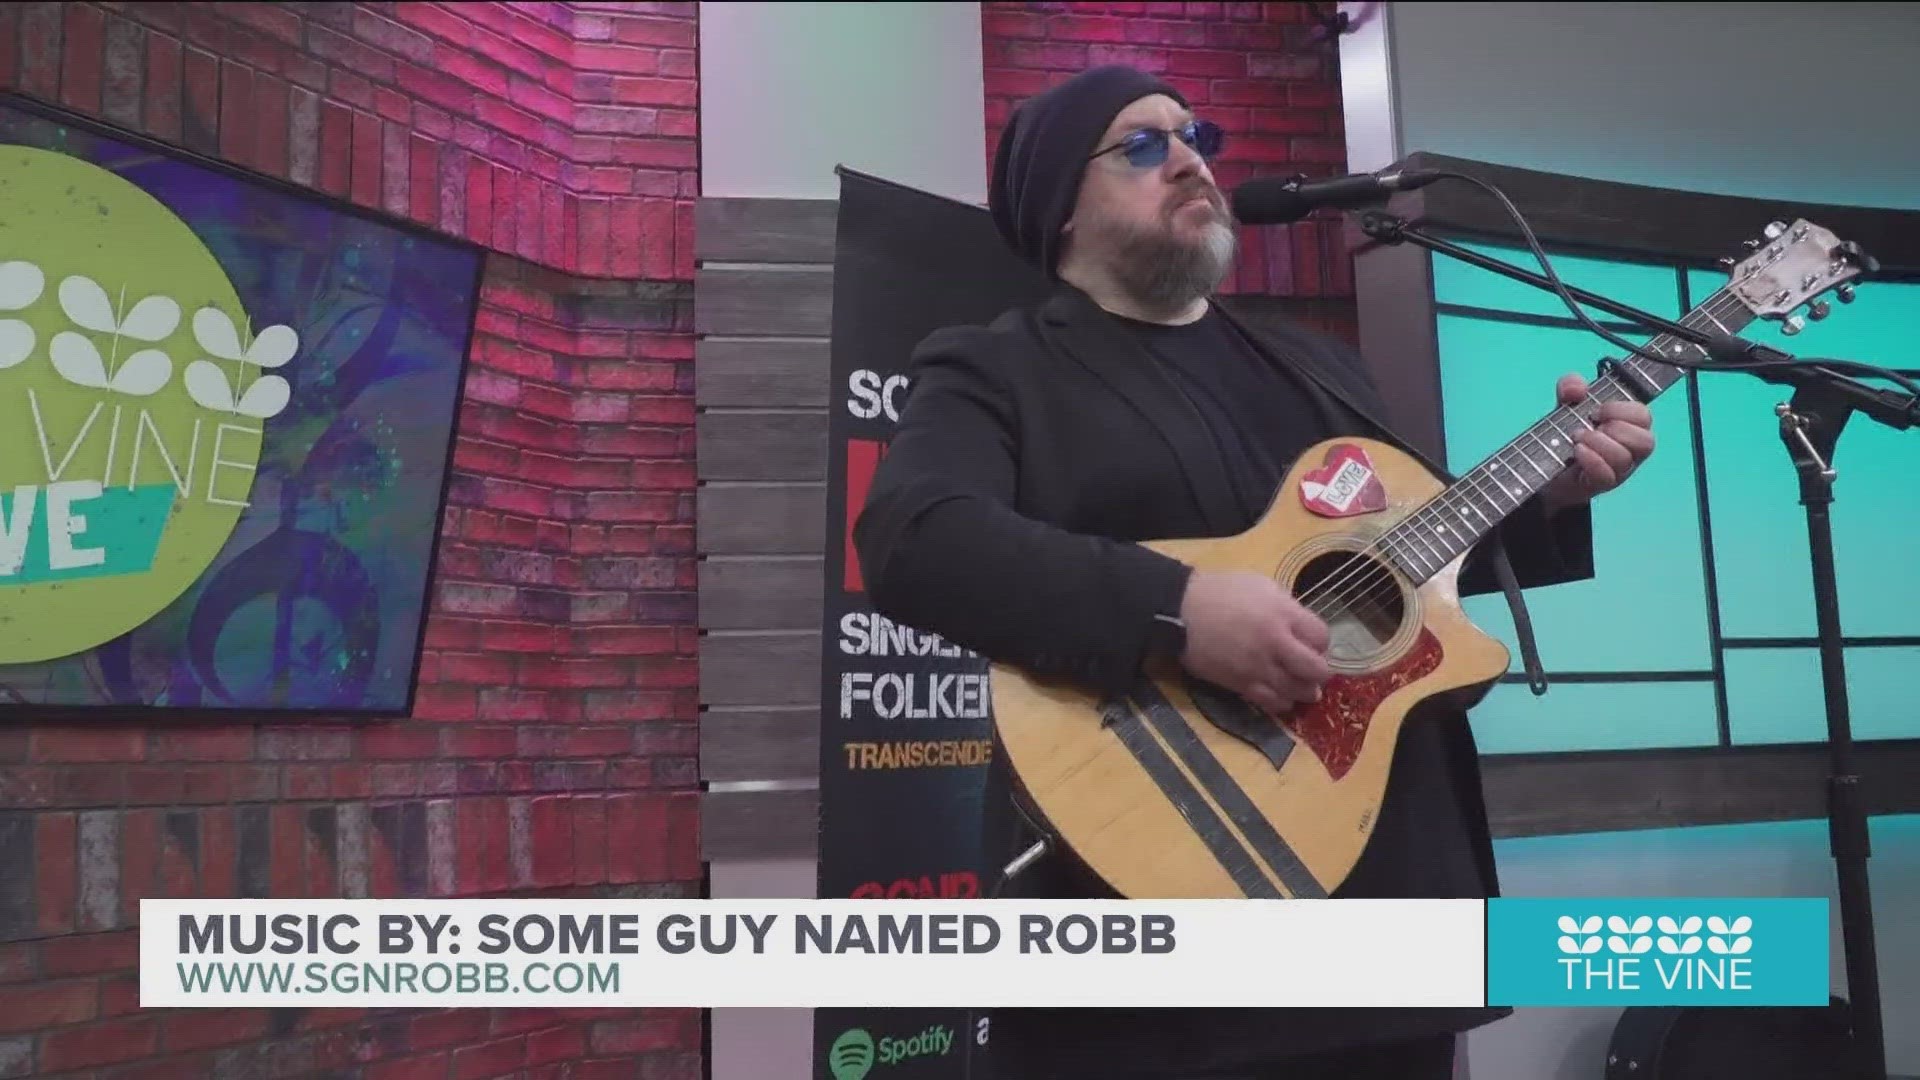 Some Guy Named Robb is back, and he tells us about some of his upcoming performances.